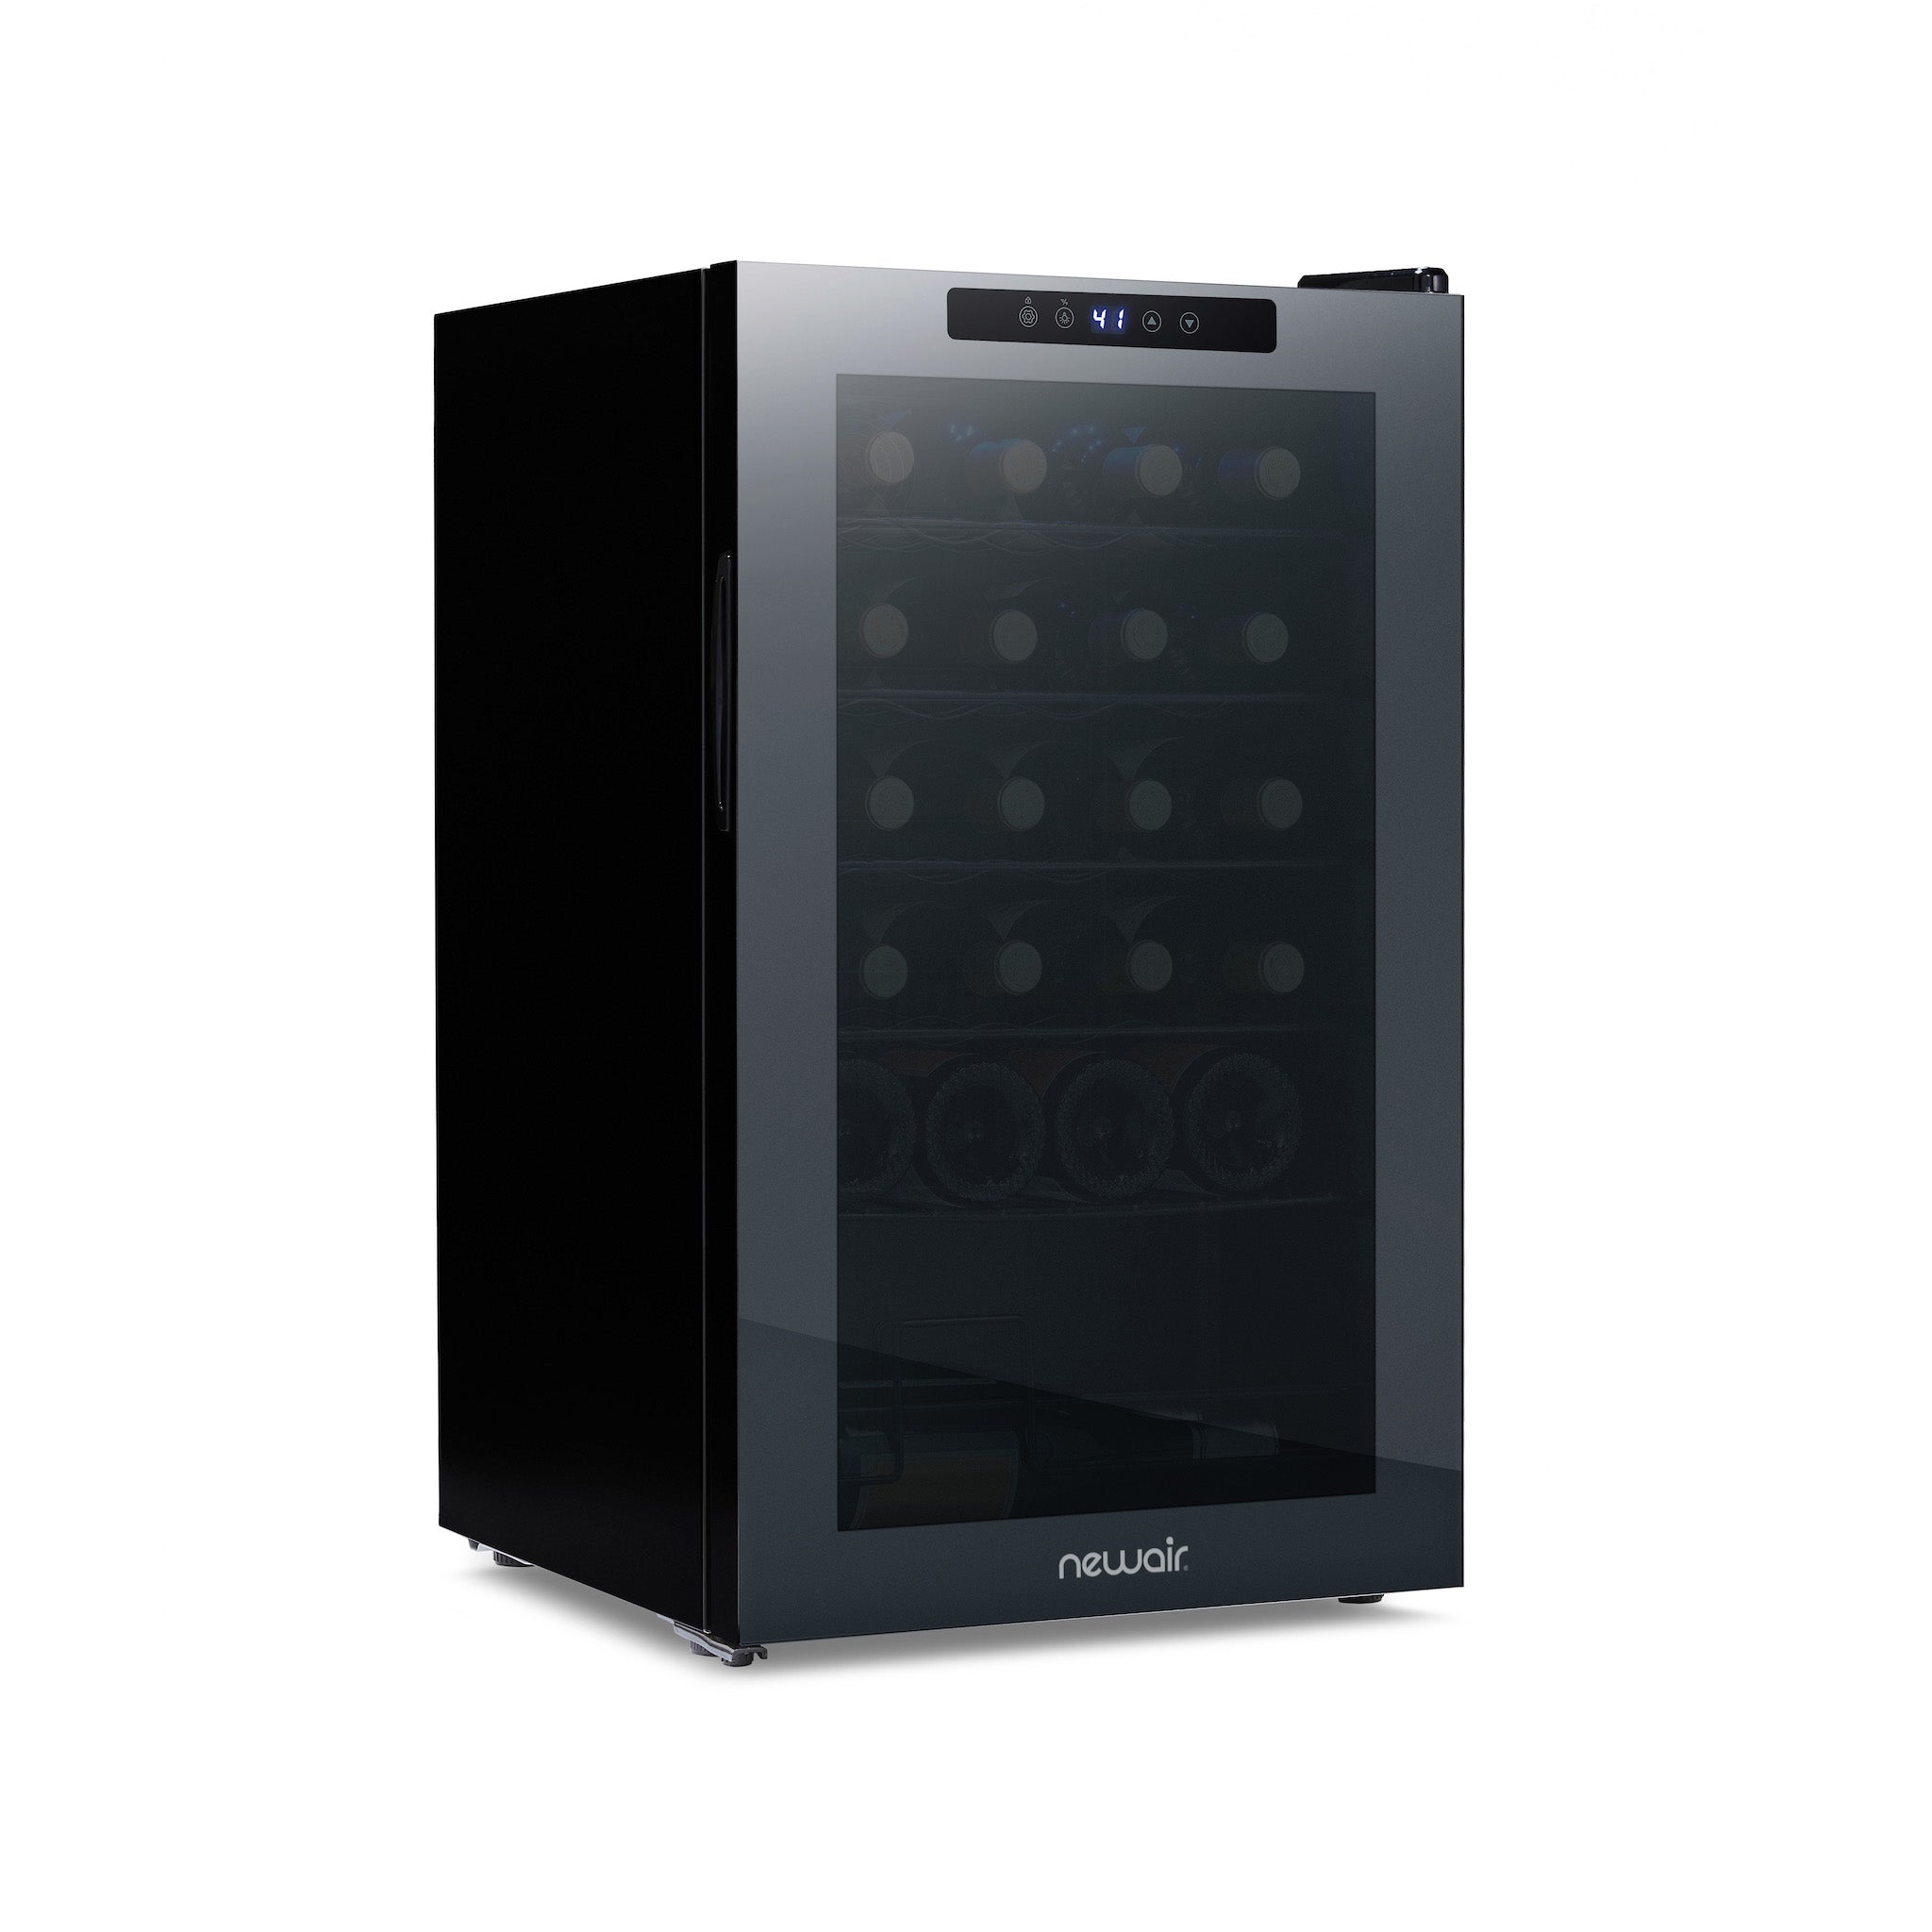 Newair® Shadow?? Series Wine Cooler Refrigerator 24 Bottle, Freestanding Mirrored Wine Fridge with Double-Layer Tempered Glass Door & Compressor Cooling for Reds, Whites, and Sparkling Wine, 41f-64f Digital Temperature Control